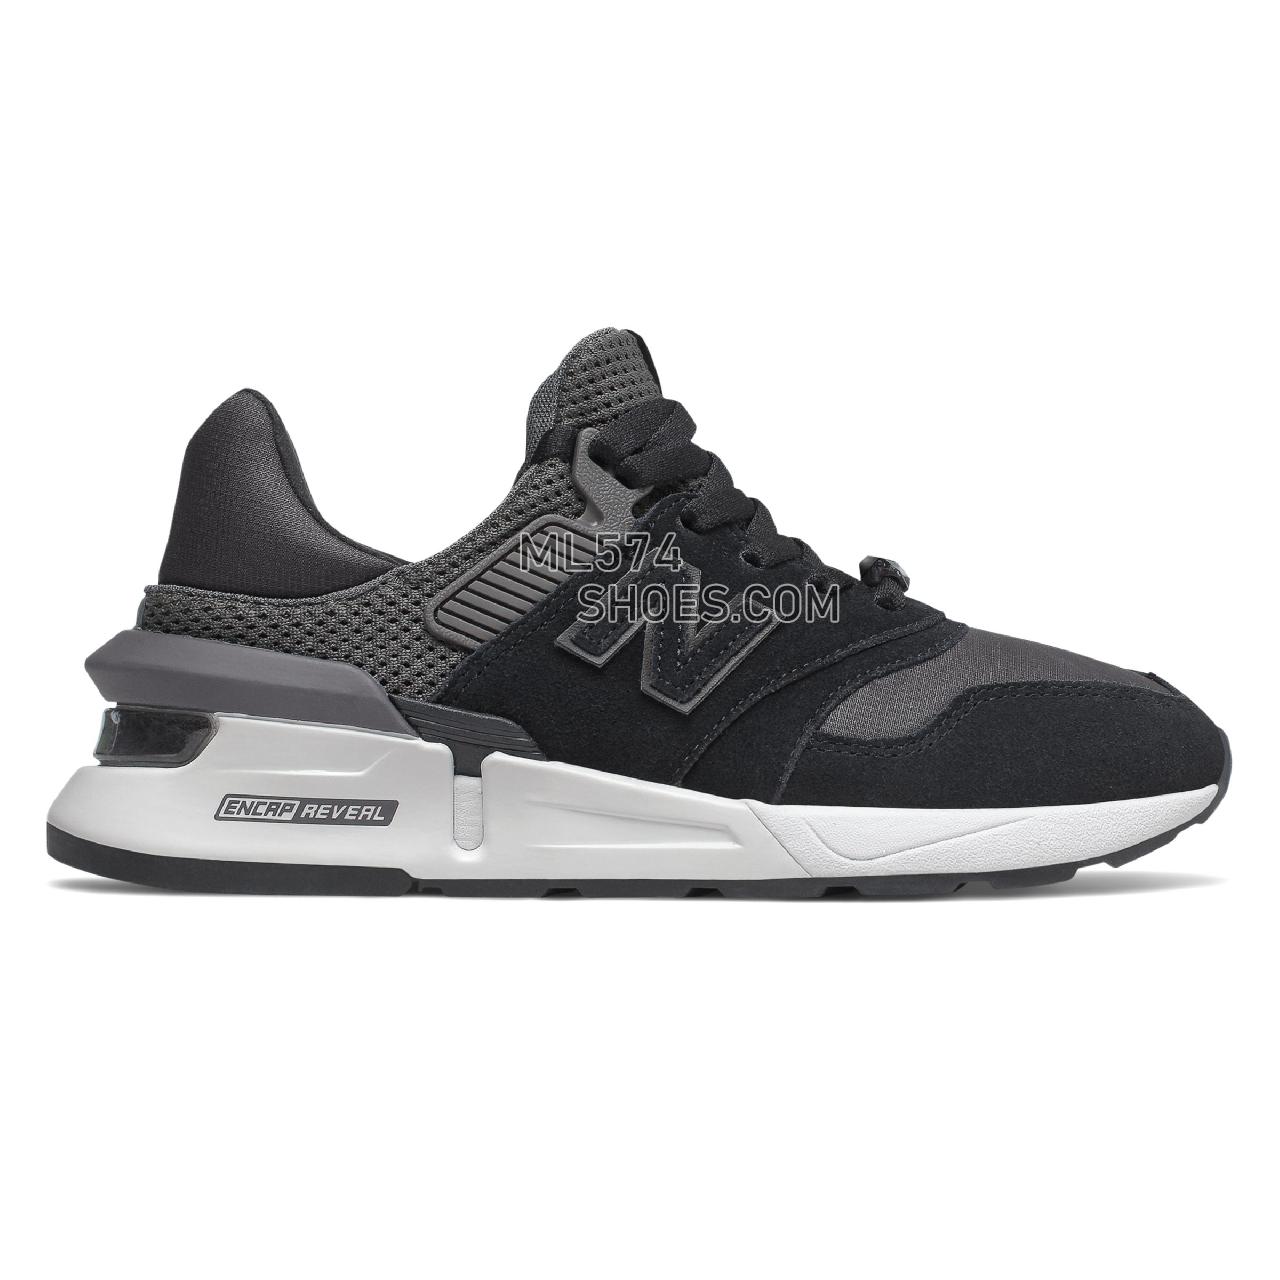 New Balance 997 Sport - Women's Sport Style Sneakers - Black with Magnet - WS997RB